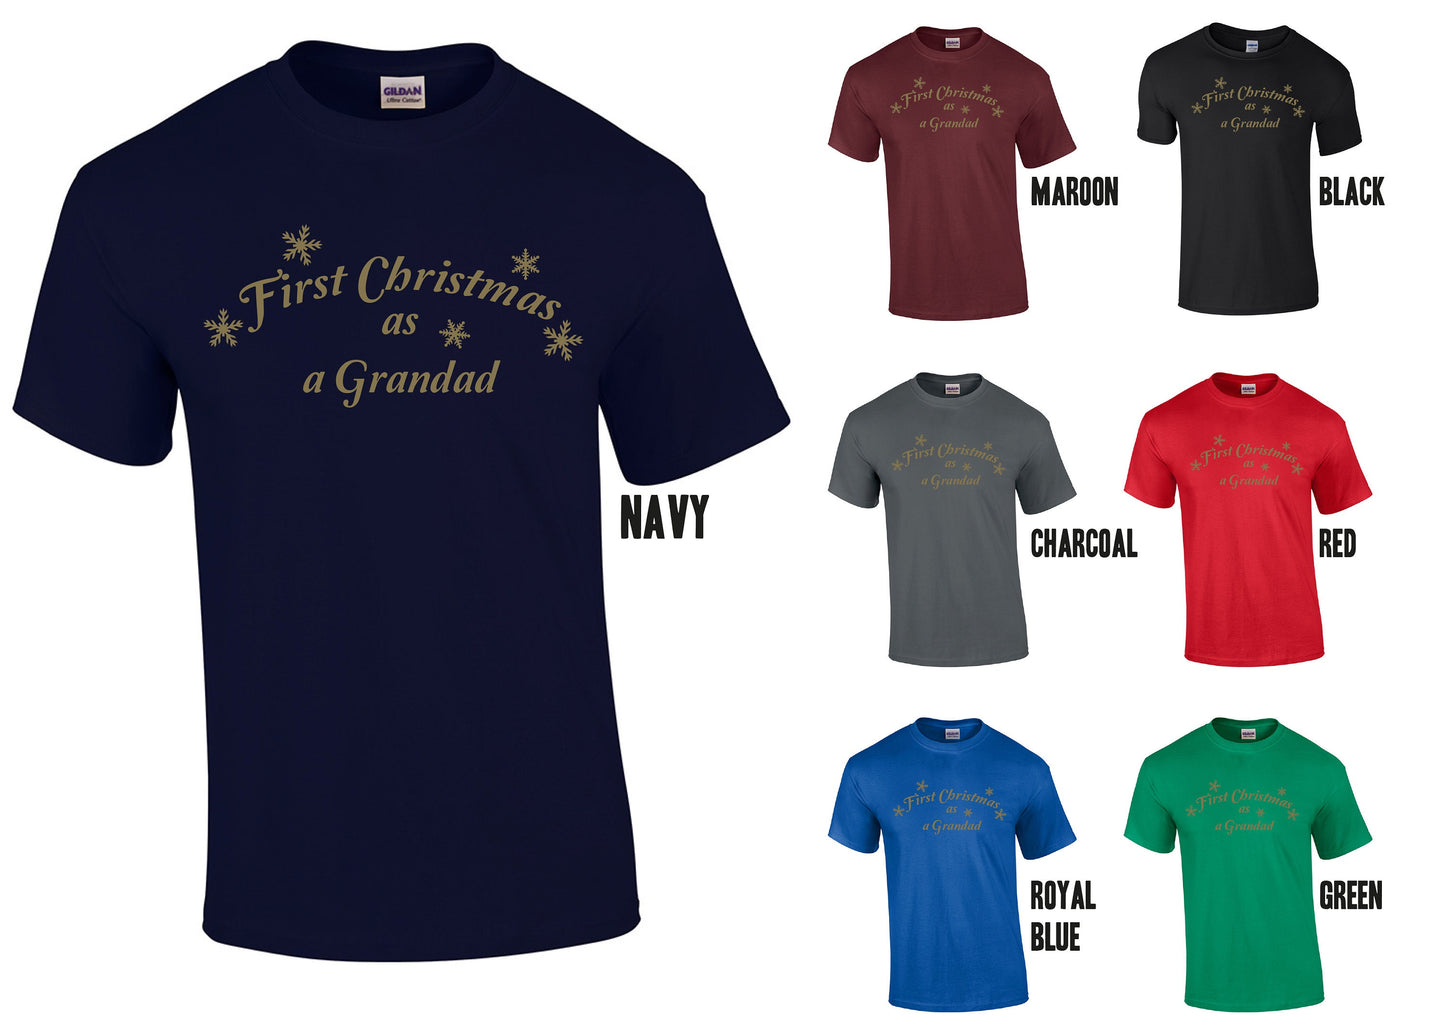 First Christmas as a Grandad T-Shirt - Gold Print - Can be changed to Papa or Grandpa or any other variation